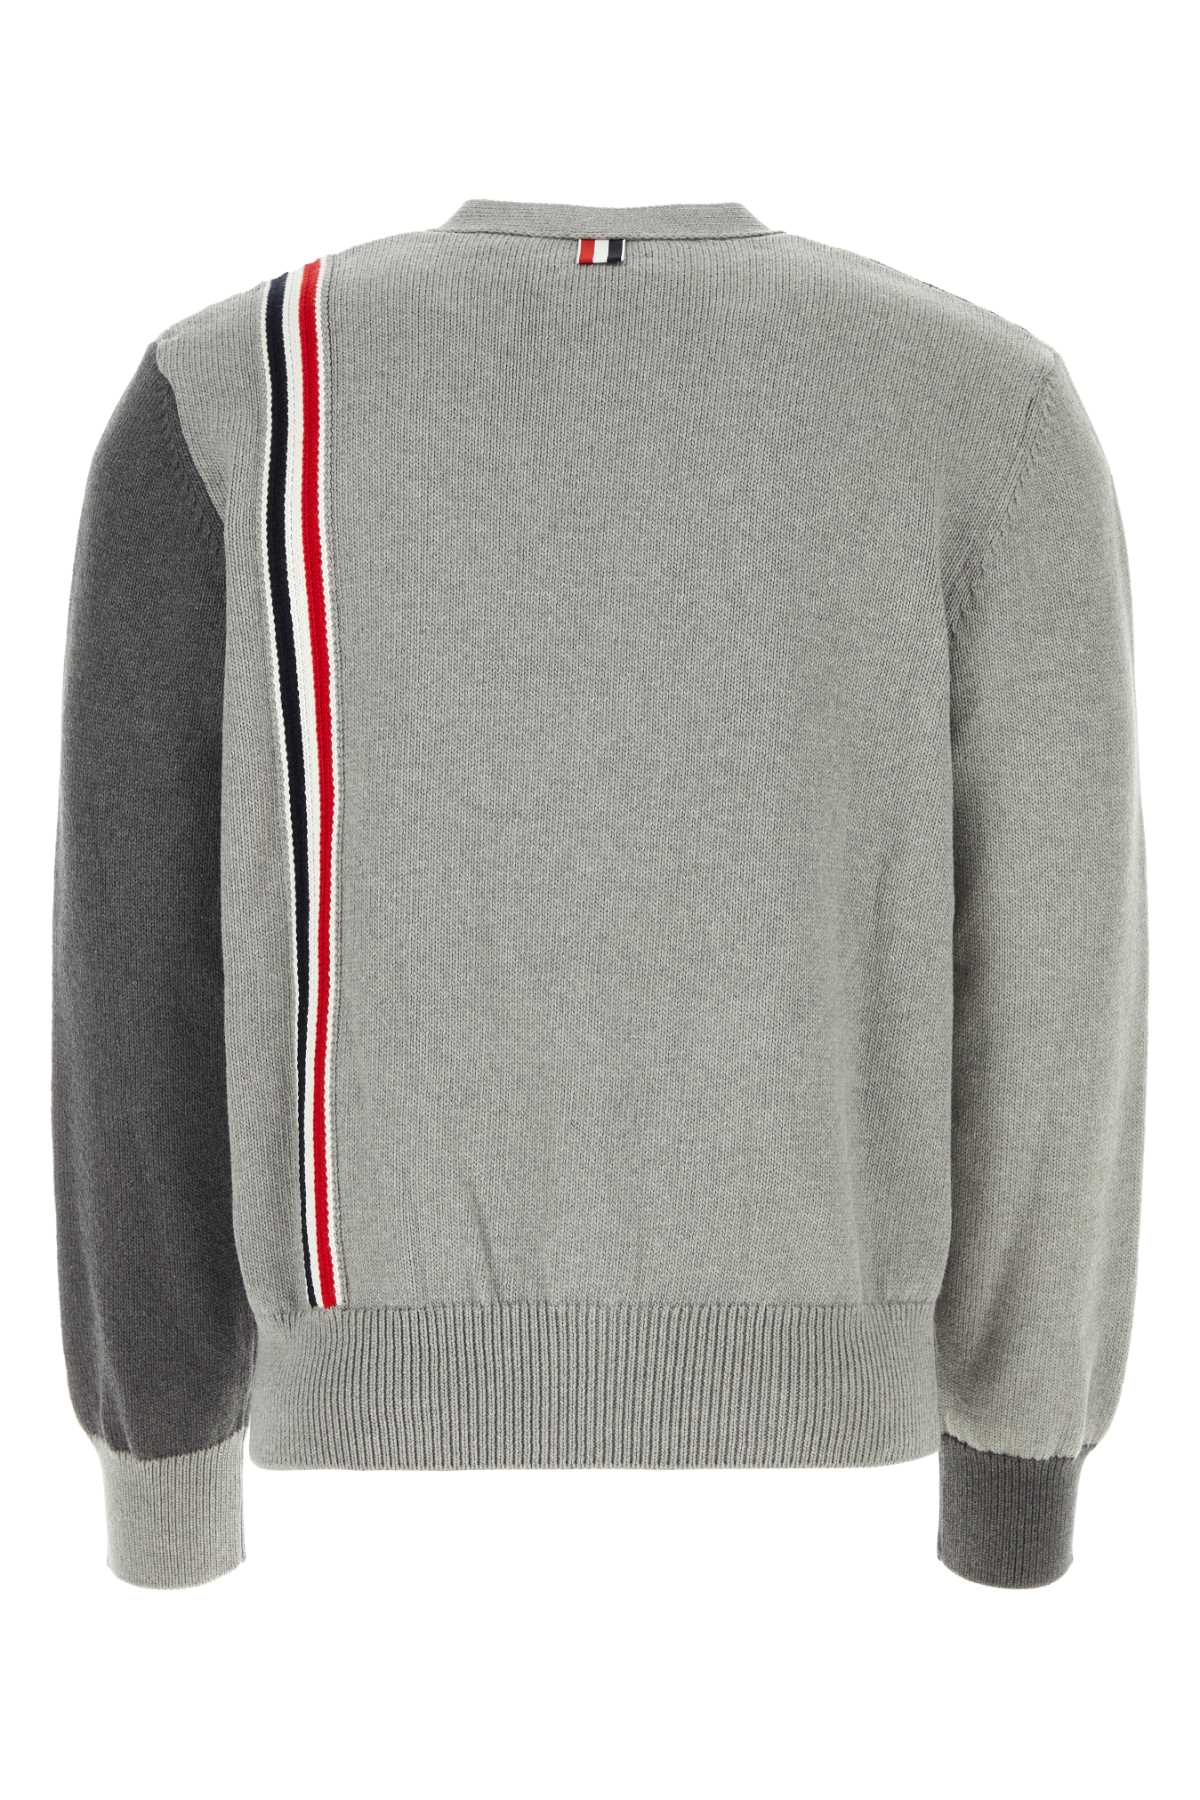 Thom Browne Two Tone Cotton Cardigan In Gray